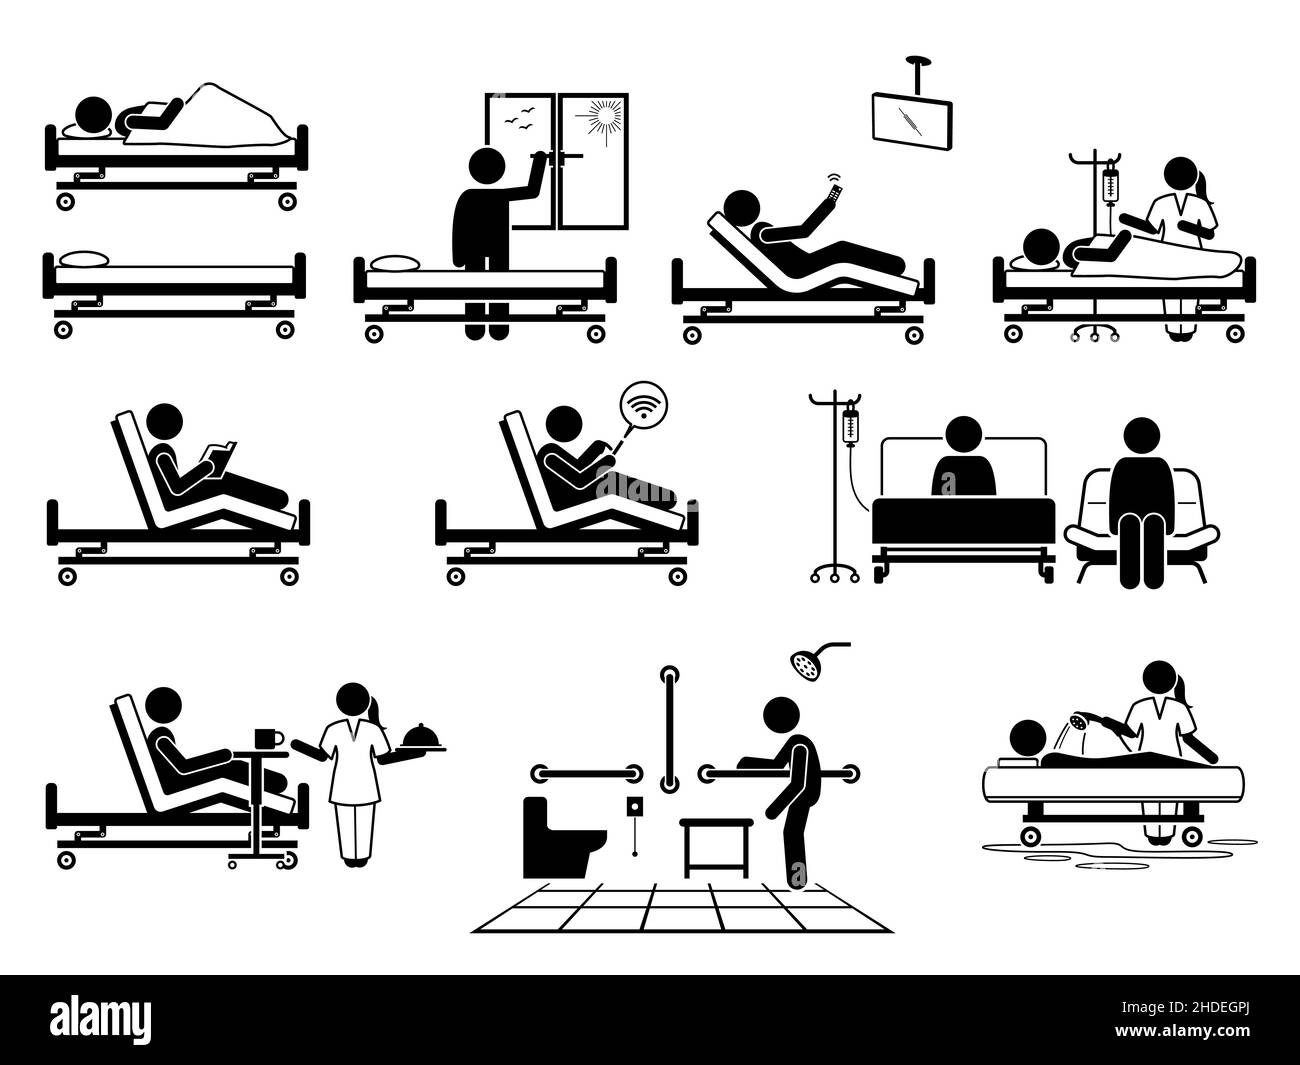 Patient at hospital room with many facilities stick figure pictogram icons. Vector illustrations of patient, hospital bed, window, television, nurse, Stock Vector